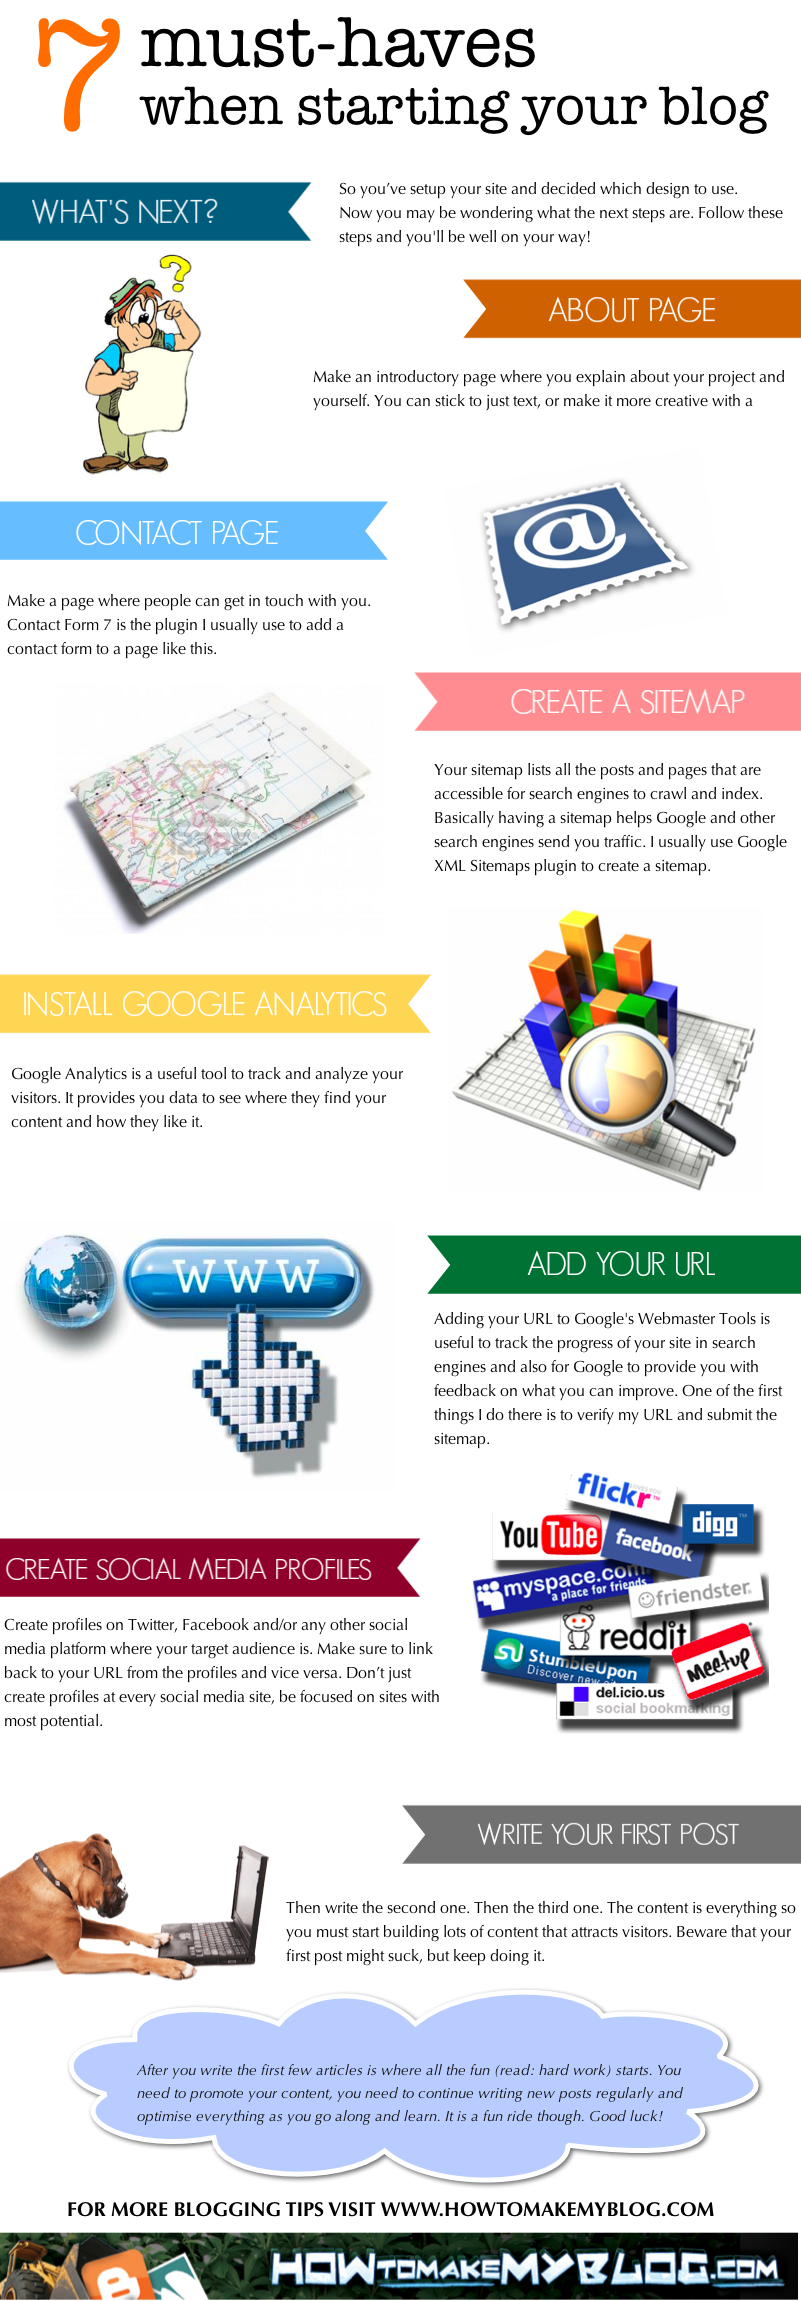 7 Must-Haves When Starting Your Blog [Infographic]